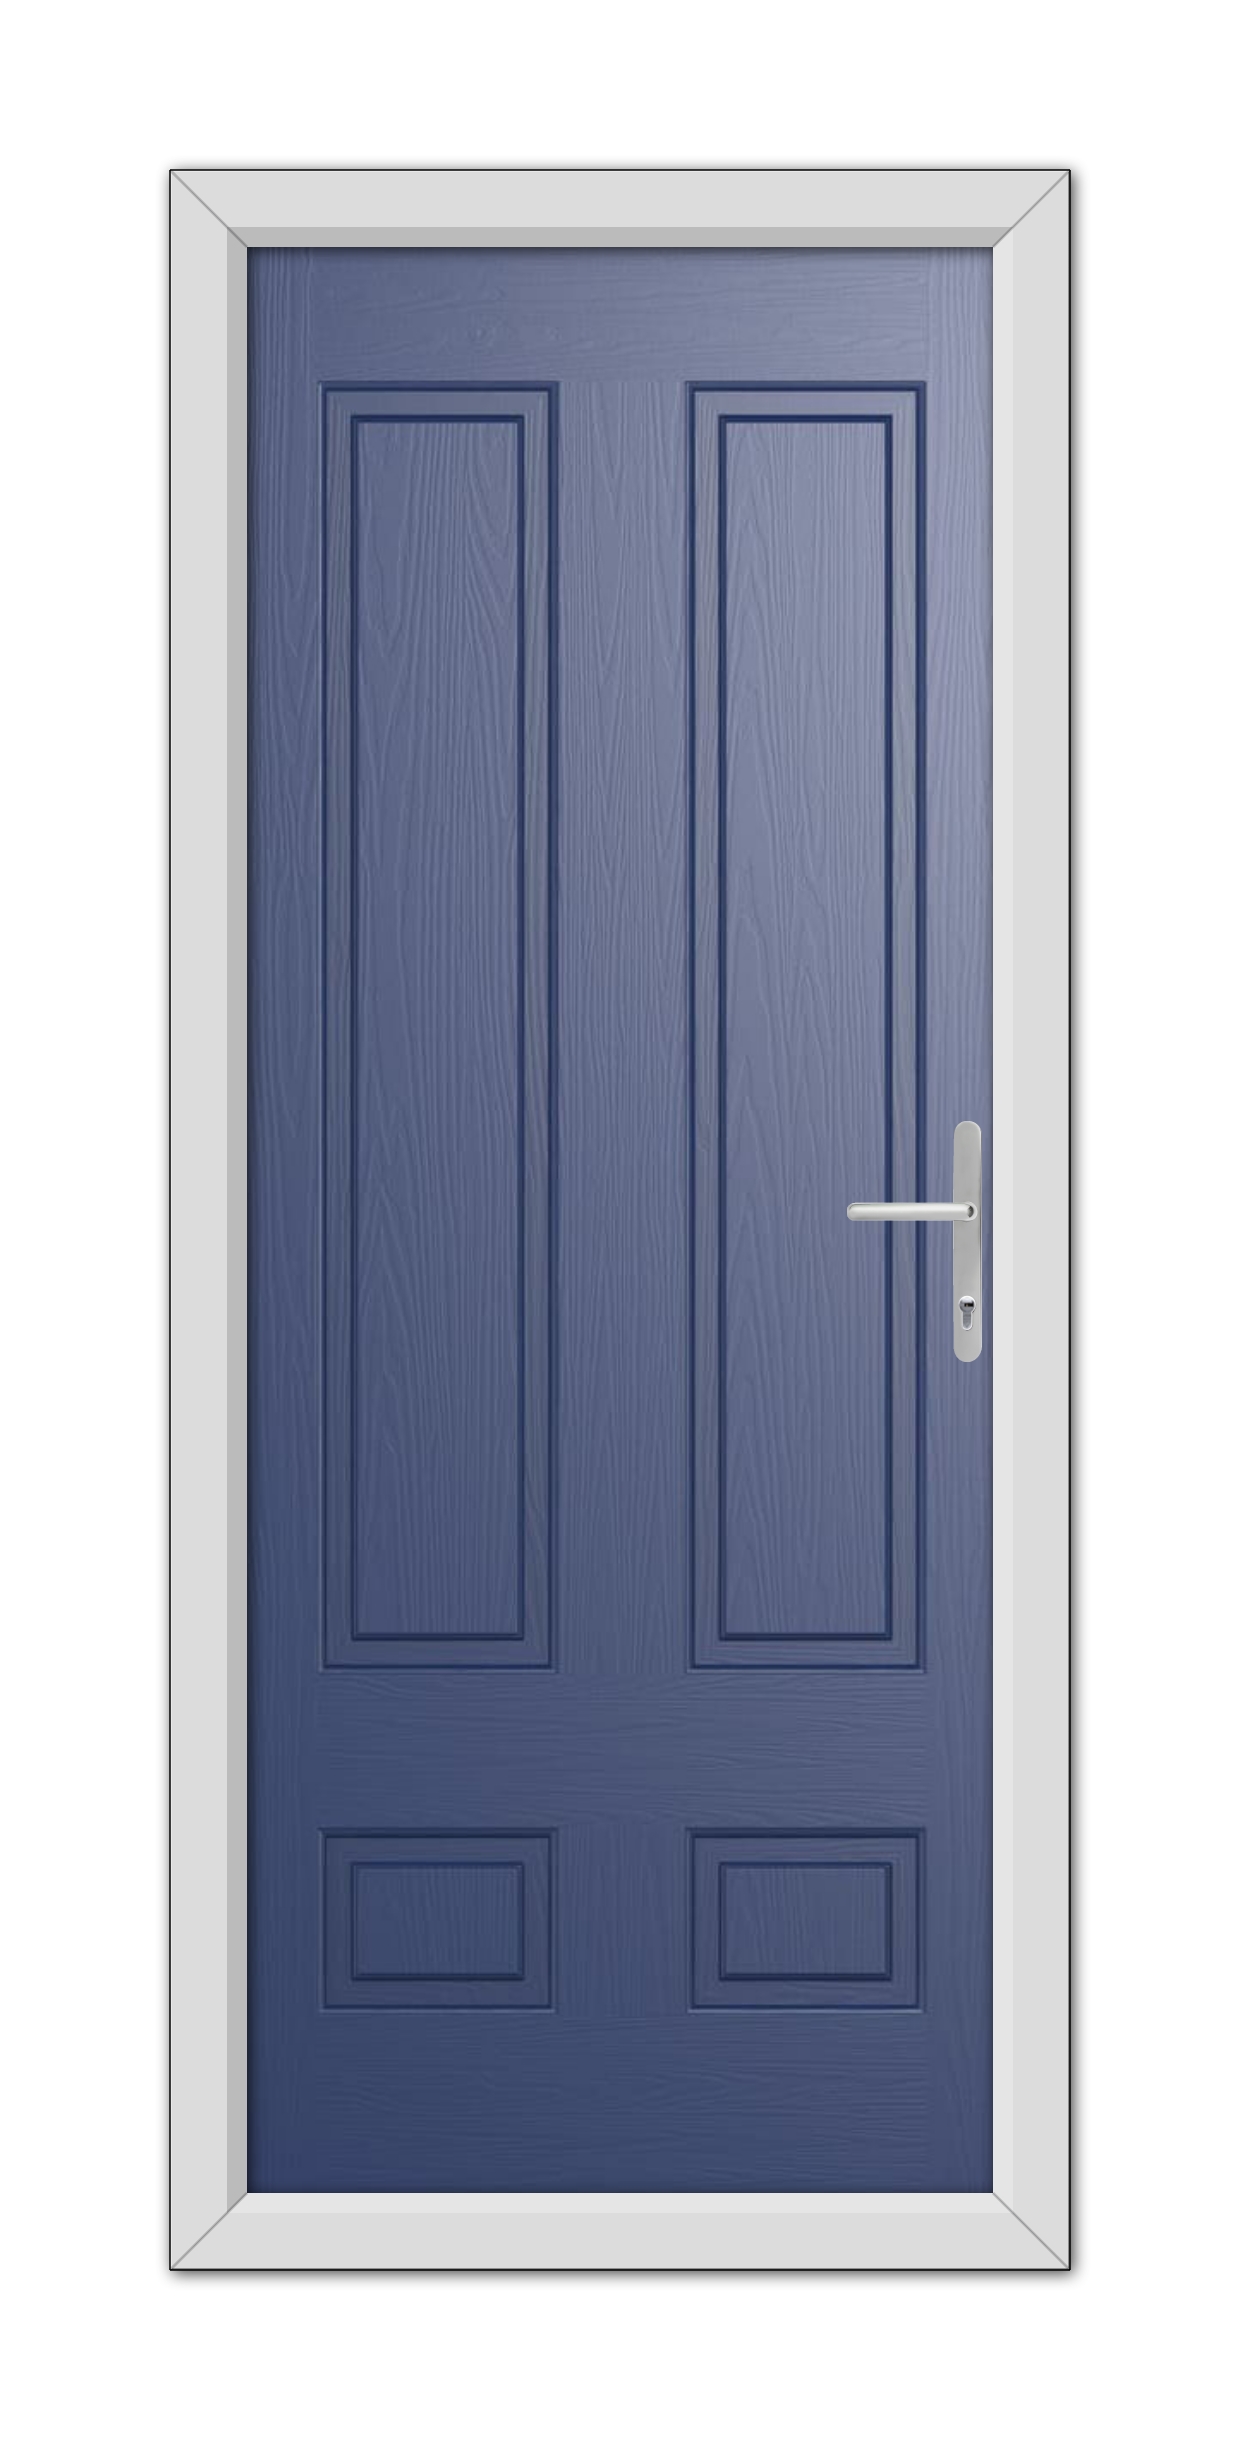 A Blue Aston Solid Composite Door 48mm Timber Core with a white frame and silver handle, featuring a minimalistic design with rectangular panels.